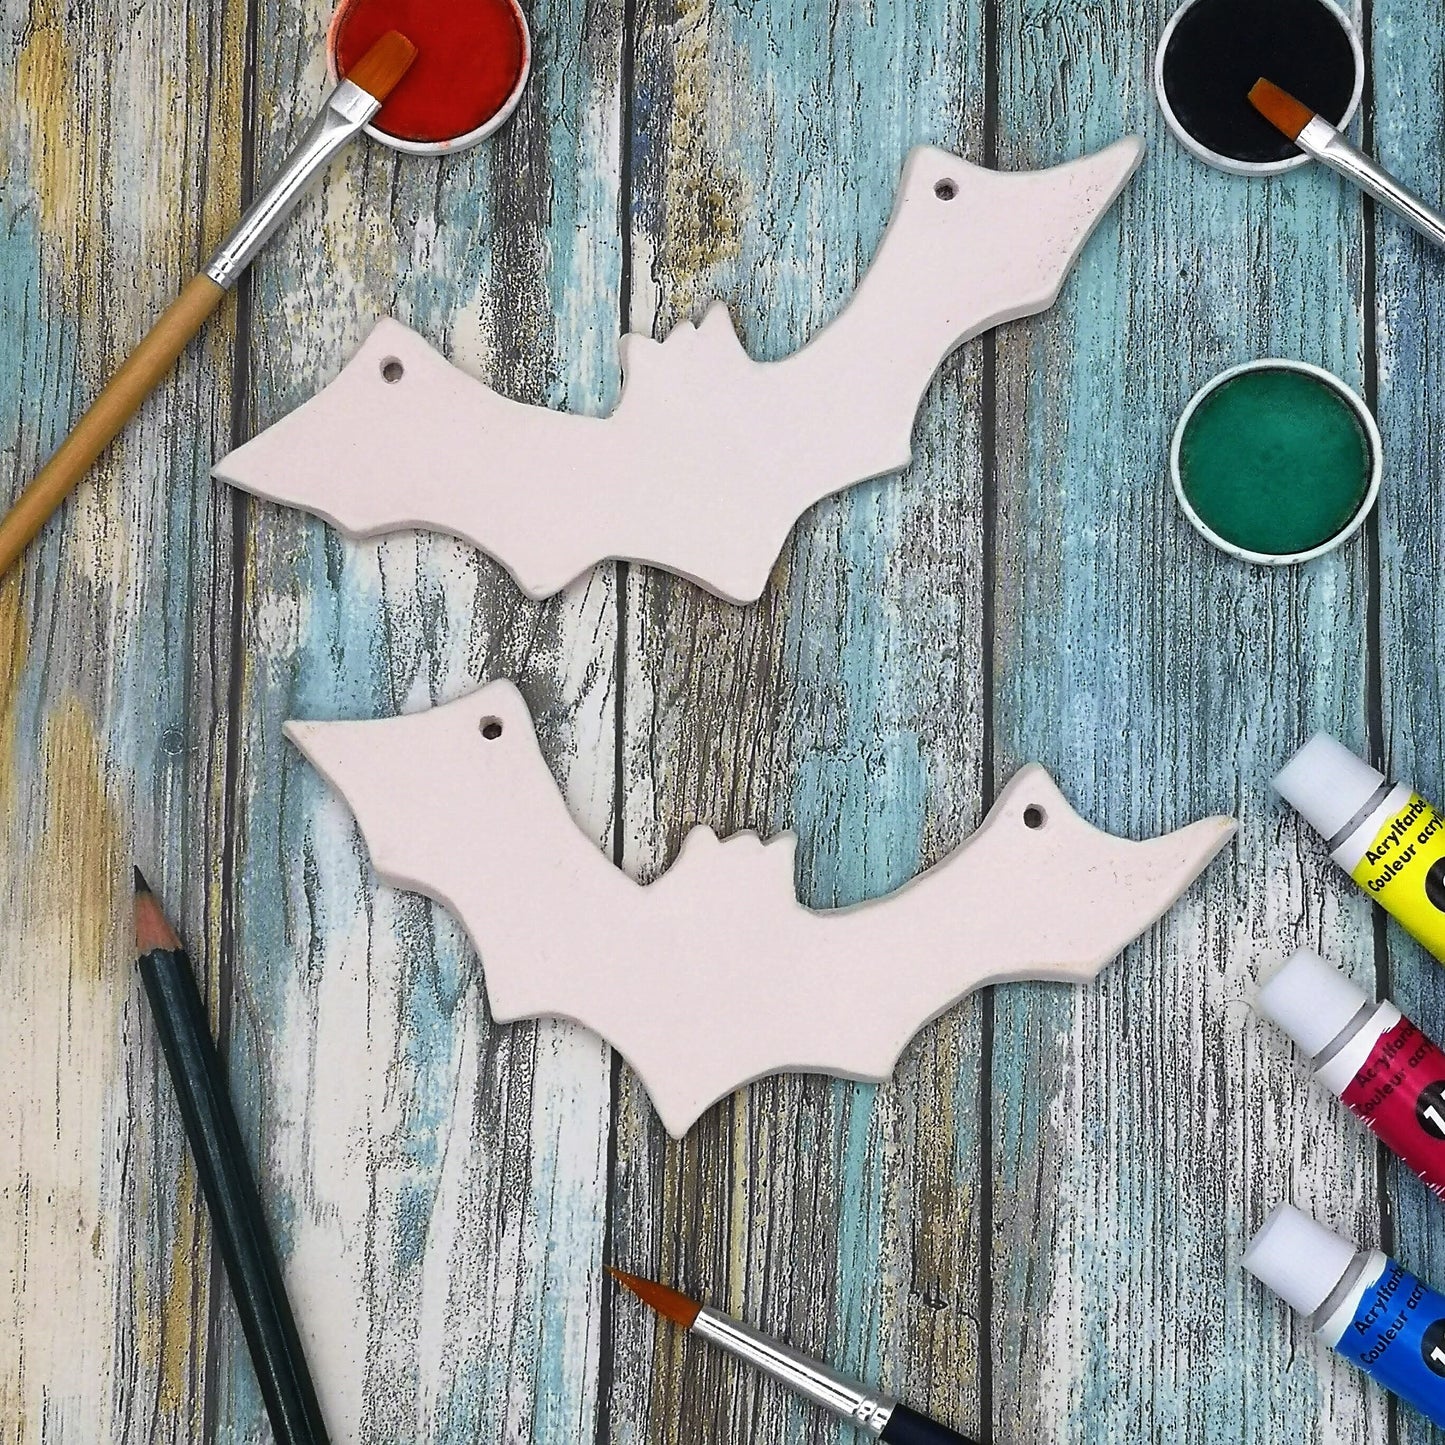 Bat Decor Wall Hanging, set of 2 Clay Ornaments Blank, Halloween Handmade Ceramic Bisque Ready To Paint, Best Sellers Diy Craft Kit - Ceramica Ana Rafael